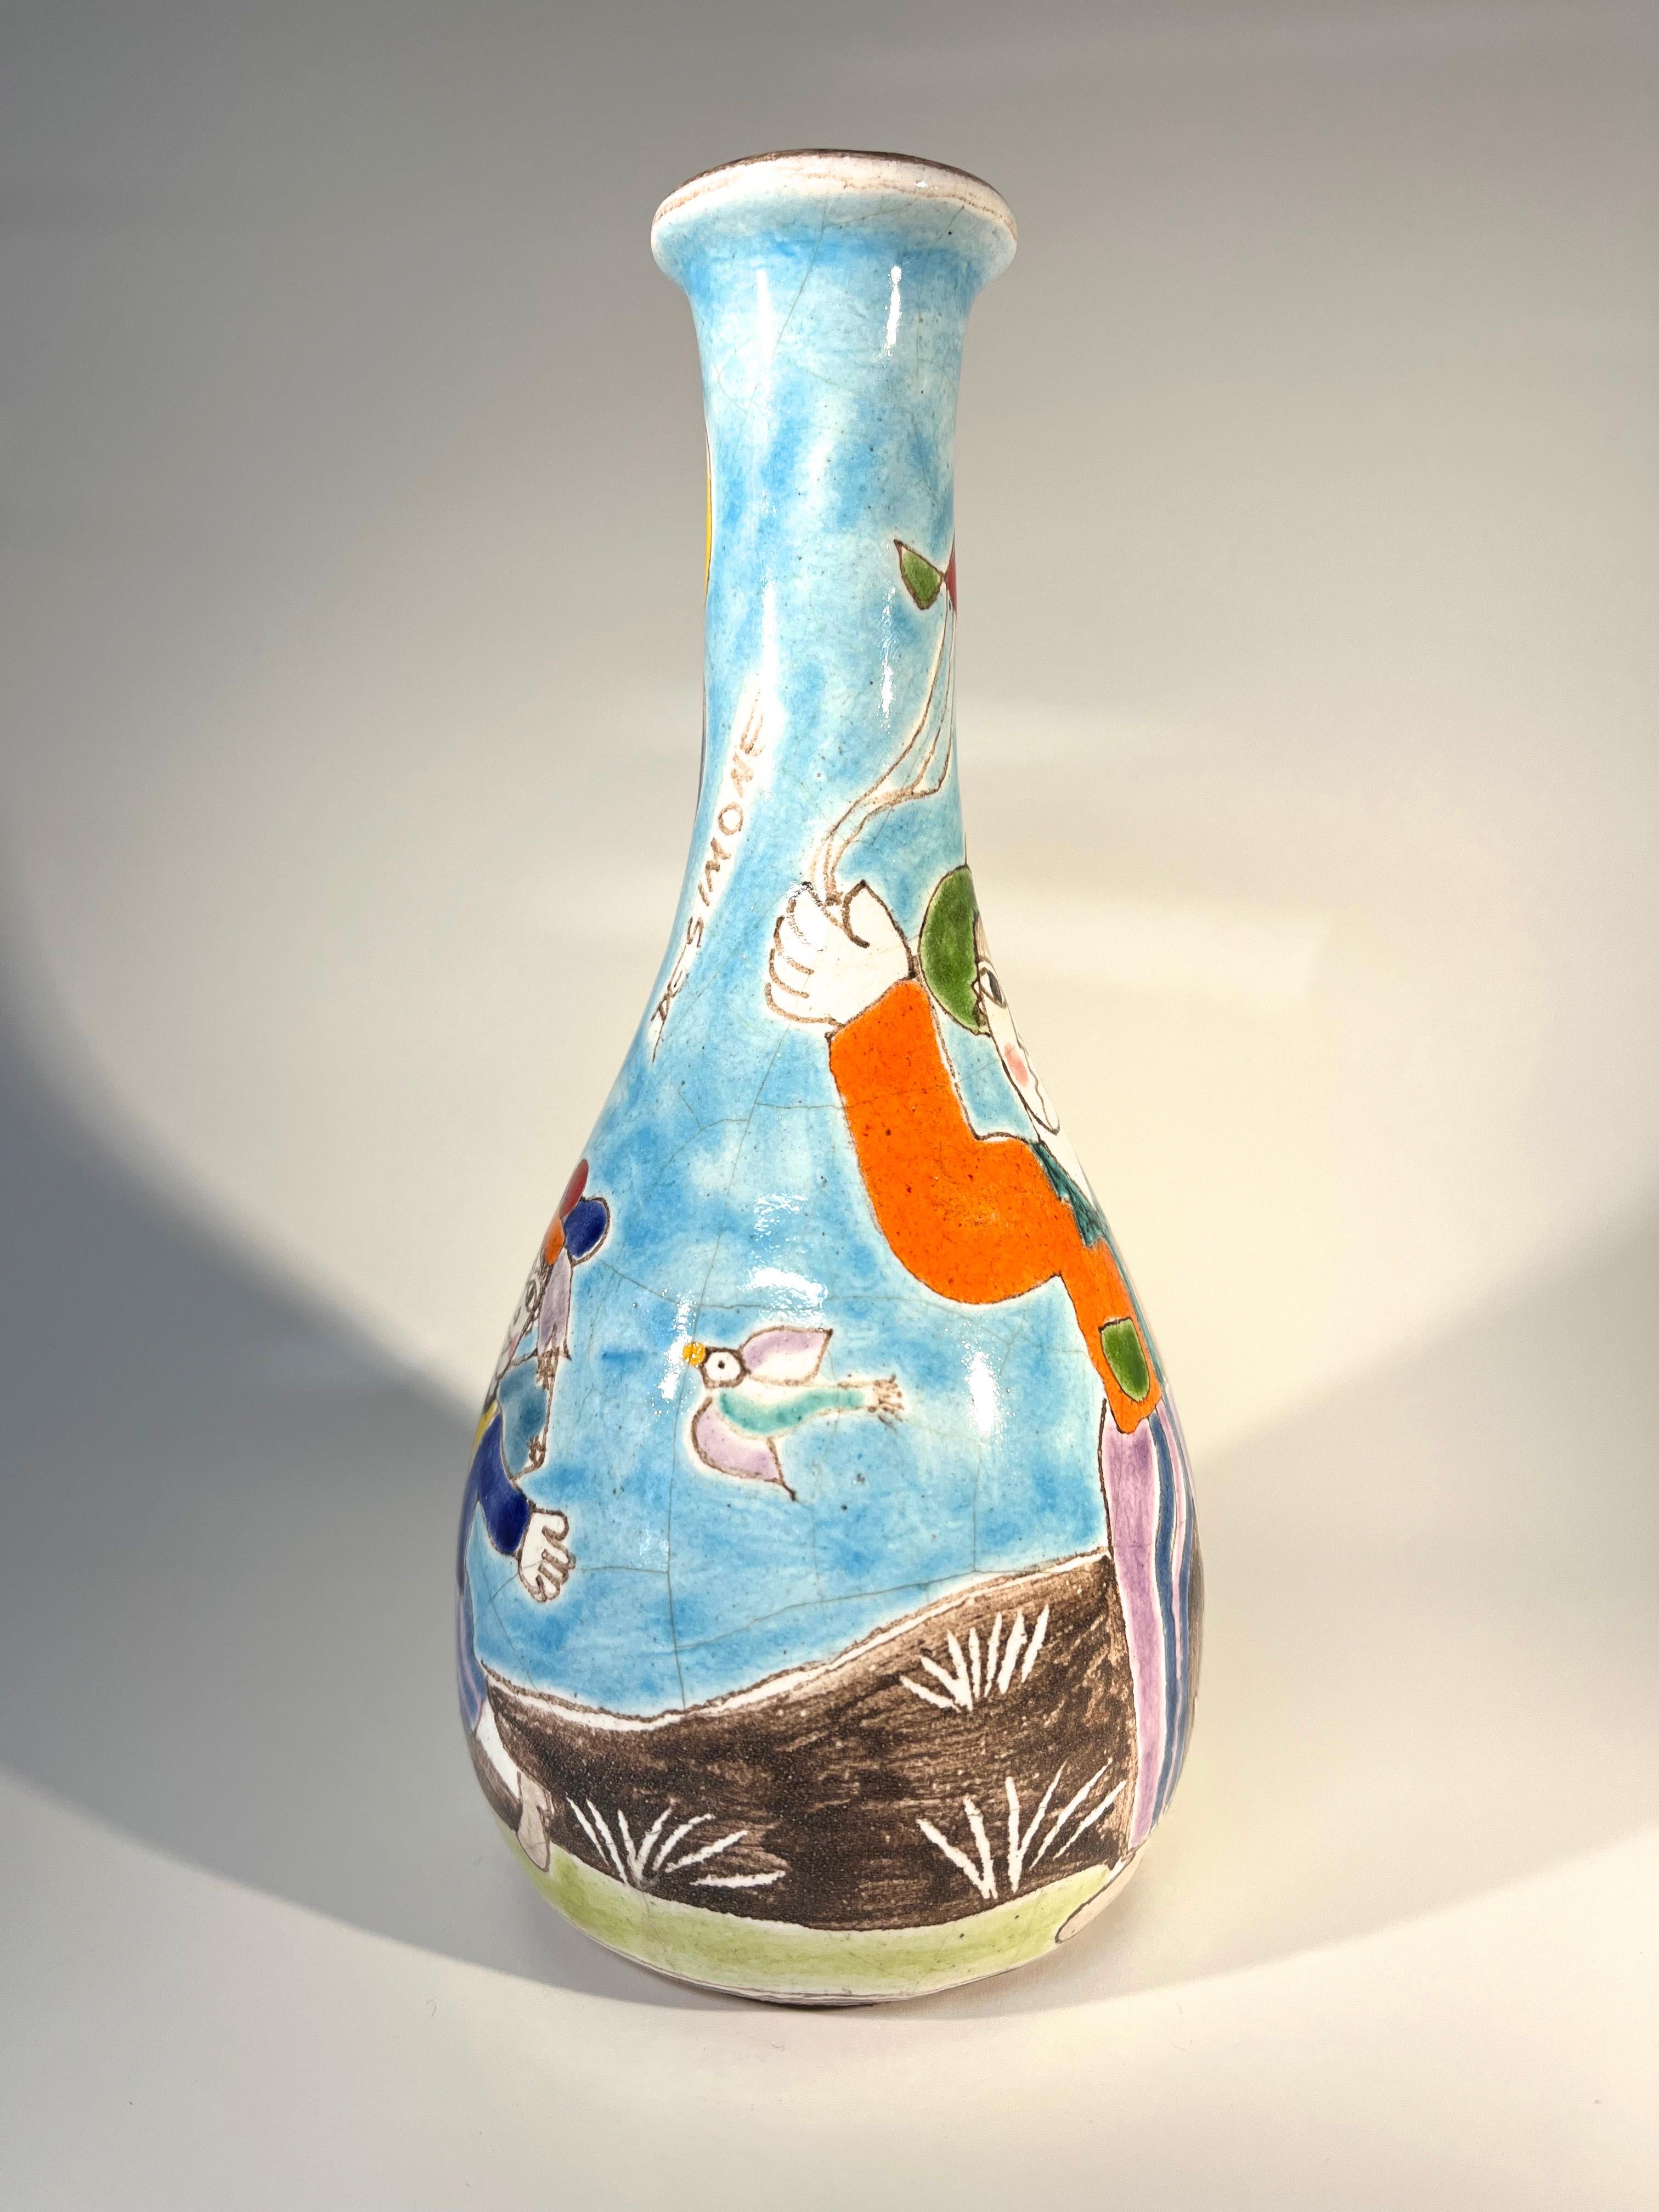 Original Signed Giovanni DeSimone Hand Painted 'Balloons' Italian Ceramic Vase  In Good Condition For Sale In Rothley, Leicestershire